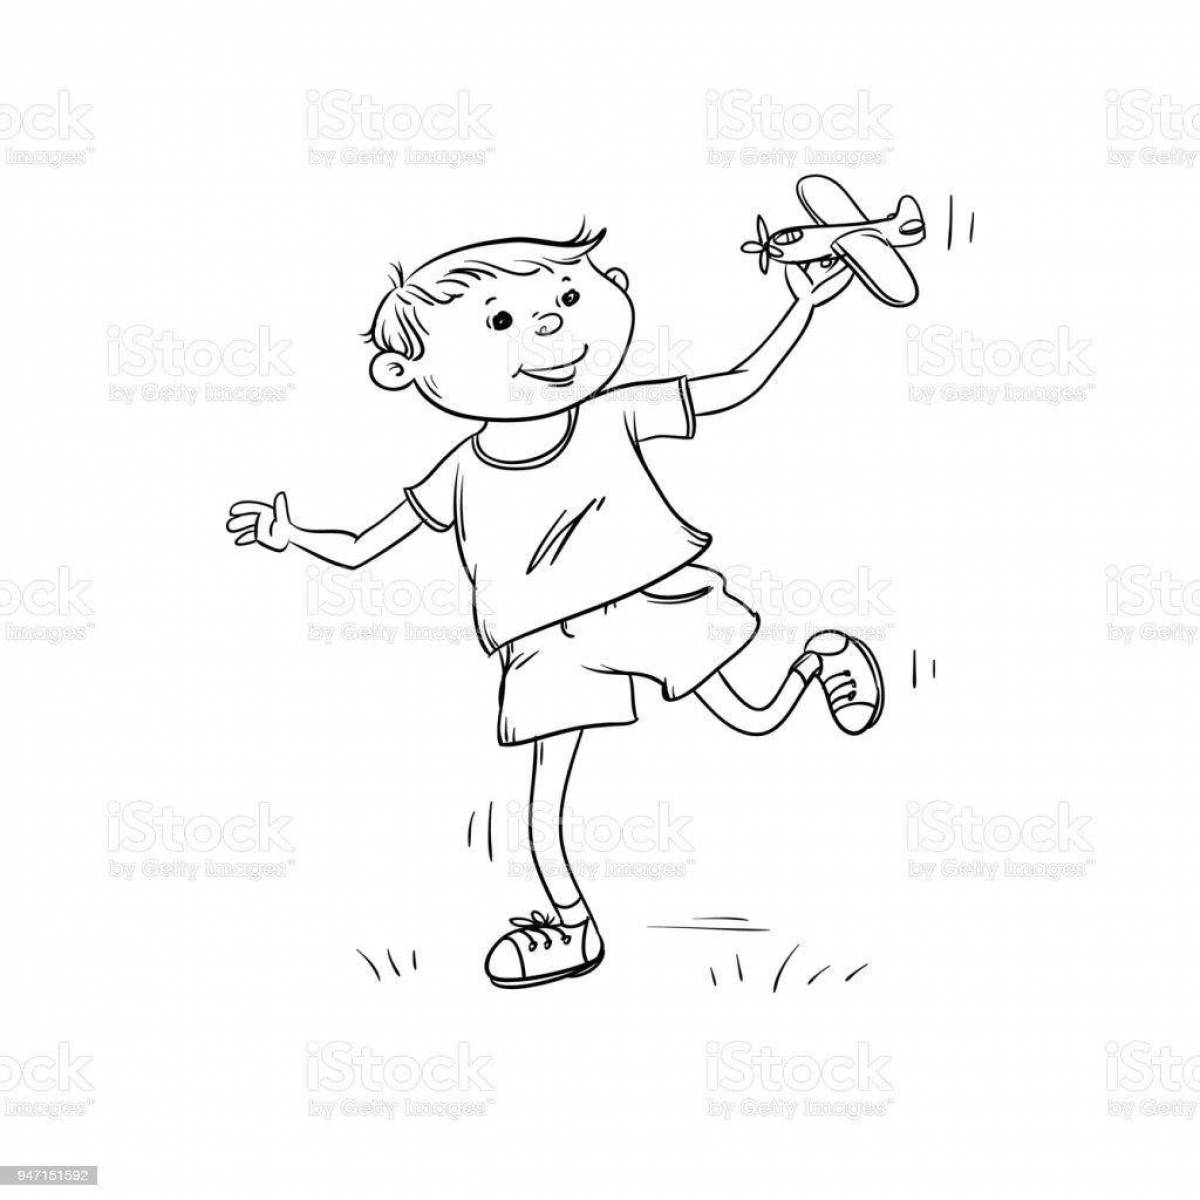 Coloring page happy running boy